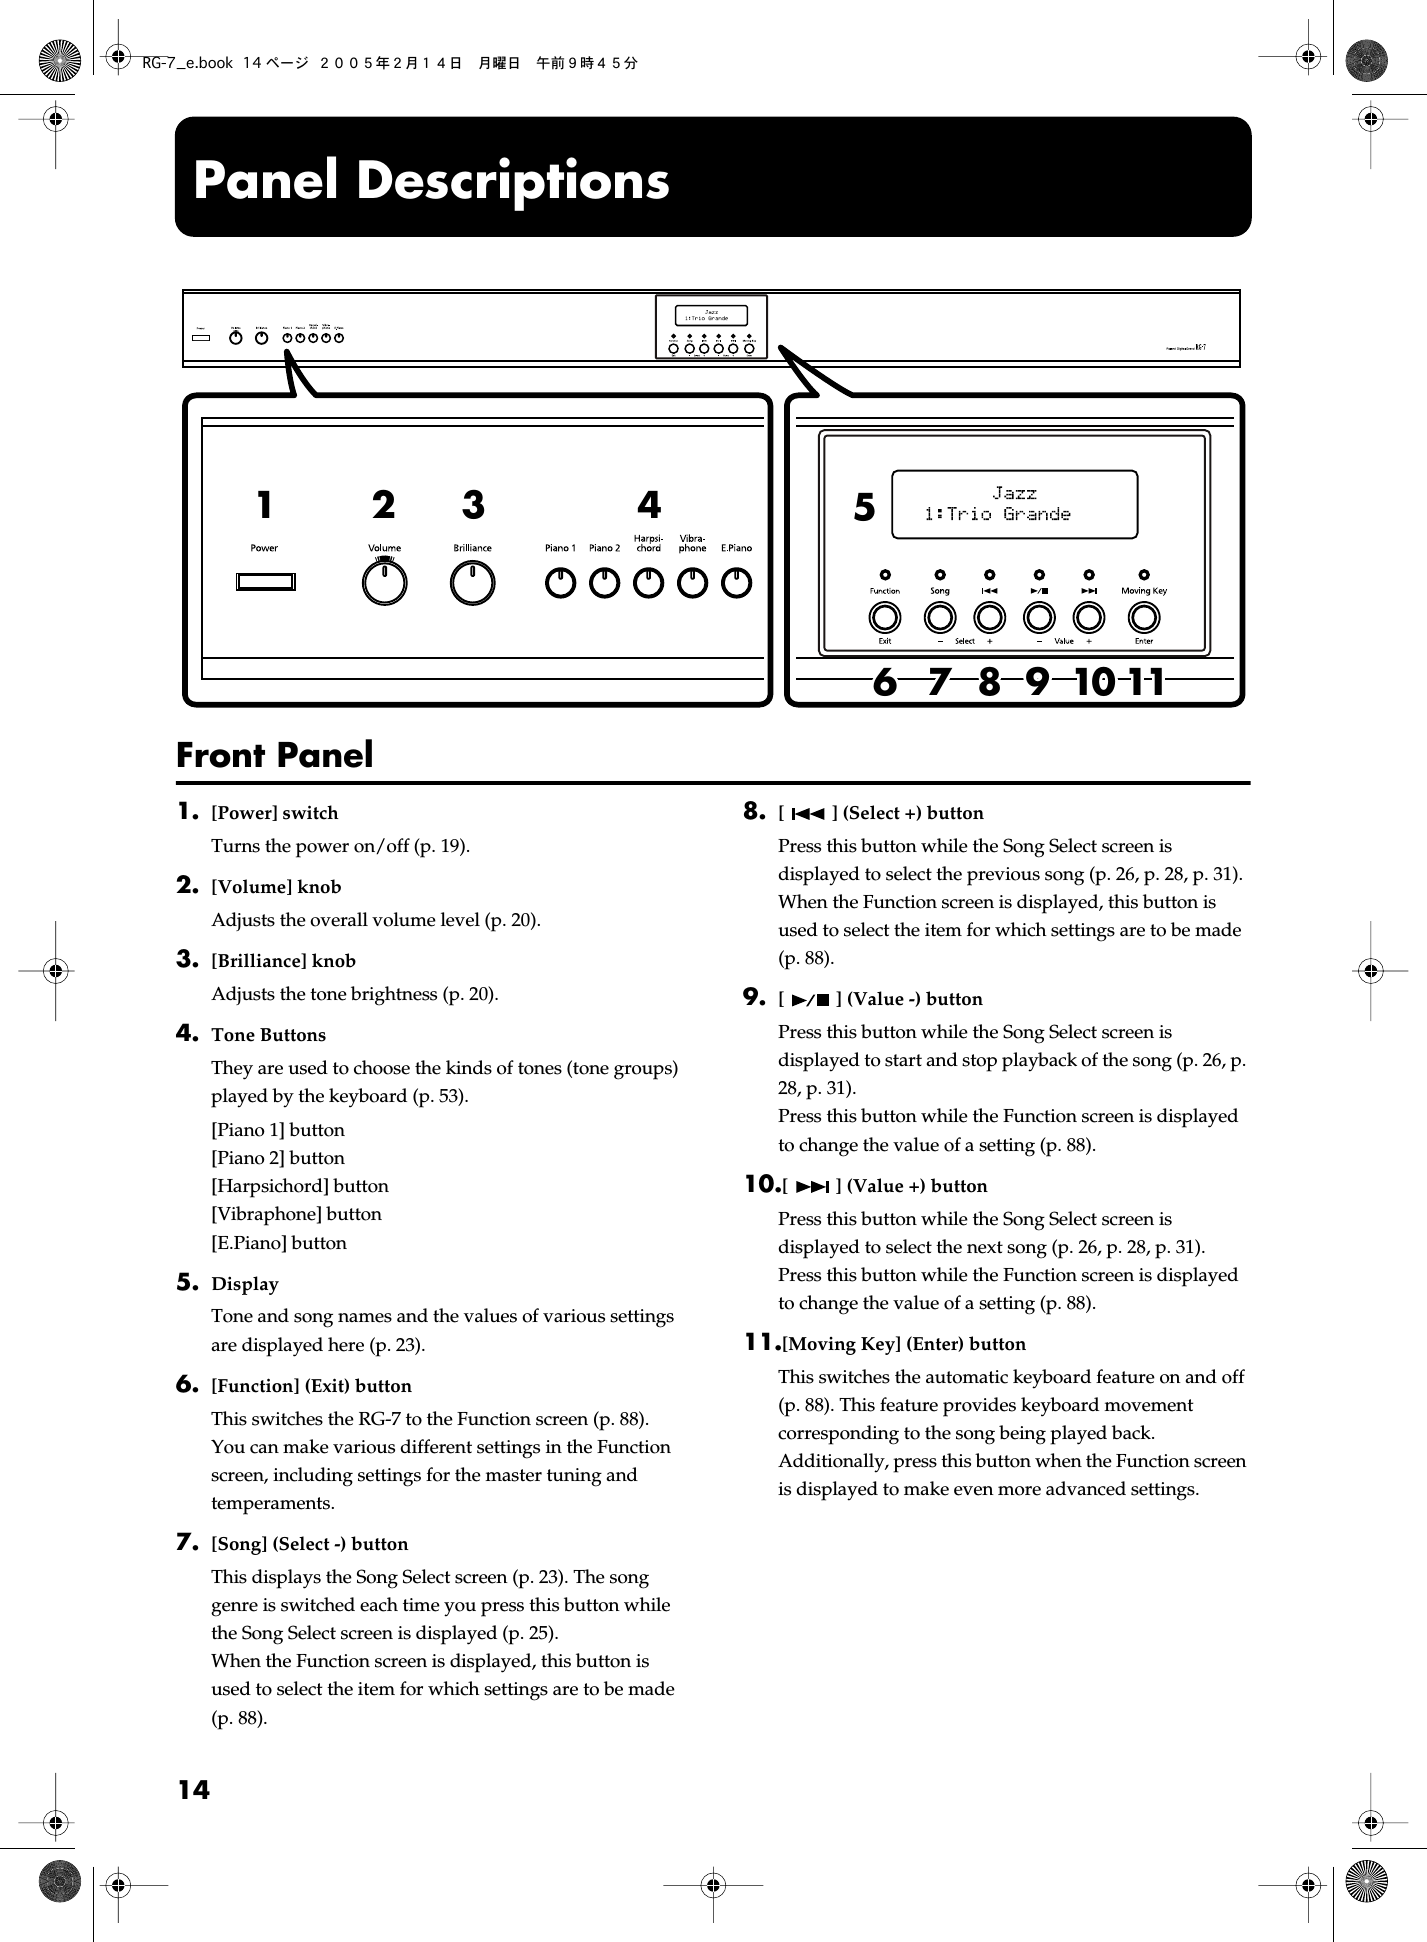  14 Panel Descriptions Front Panel 1. [Power] switch Turns the power on/off (p. 19). 2. [Volume] knob Adjusts the overall volume level (p. 20). 3. [Brilliance] knob Adjusts the tone brightness (p. 20). 4. Tone Buttons They are used to choose the kinds of tones (tone groups) played by the keyboard (p. 53).[Piano 1] button[Piano 2] button[Harpsichord] button[Vibraphone] button[E.Piano] button 5. Display Tone and song names and the values of various settings are displayed here (p. 23). 6. [Function] (Exit) button This switches the RG-7 to the Function screen (p. 88). You can make various different settings in the Function screen, including settings for the master tuning and temperaments. 7. [Song] (Select -) button This displays the Song Select screen (p. 23). The song genre is switched each time you press this button while the Song Select screen is displayed (p. 25).When the Function screen is displayed, this button is used to select the item for which settings are to be made (p. 88). 8. [] (Select +) button Press this button while the Song Select screen is displayed to select the previous song (p. 26, p. 28, p. 31).When the Function screen is displayed, this button is used to select the item for which settings are to be made (p. 88). 9. [] (Value -) button Press this button while the Song Select screen is displayed to start and stop playback of the song (p. 26, p. 28, p. 31).Press this button while the Function screen is displayed to change the value of a setting (p. 88). 10. [] (Value +) button Press this button while the Song Select screen is displayed to select the next song (p. 26, p. 28, p. 31).Press this button while the Function screen is displayed to change the value of a setting (p. 88). 11. [Moving Key] (Enter) button This switches the automatic keyboard feature on and off (p. 88). This feature provides keyboard movement corresponding to the song being played back.Additionally, press this button when the Function screen is displayed to make even more advanced settings.1523 4678910 11RG-7_e.book 14 ページ ２００５年２月１４日　月曜日　午前９時４５分